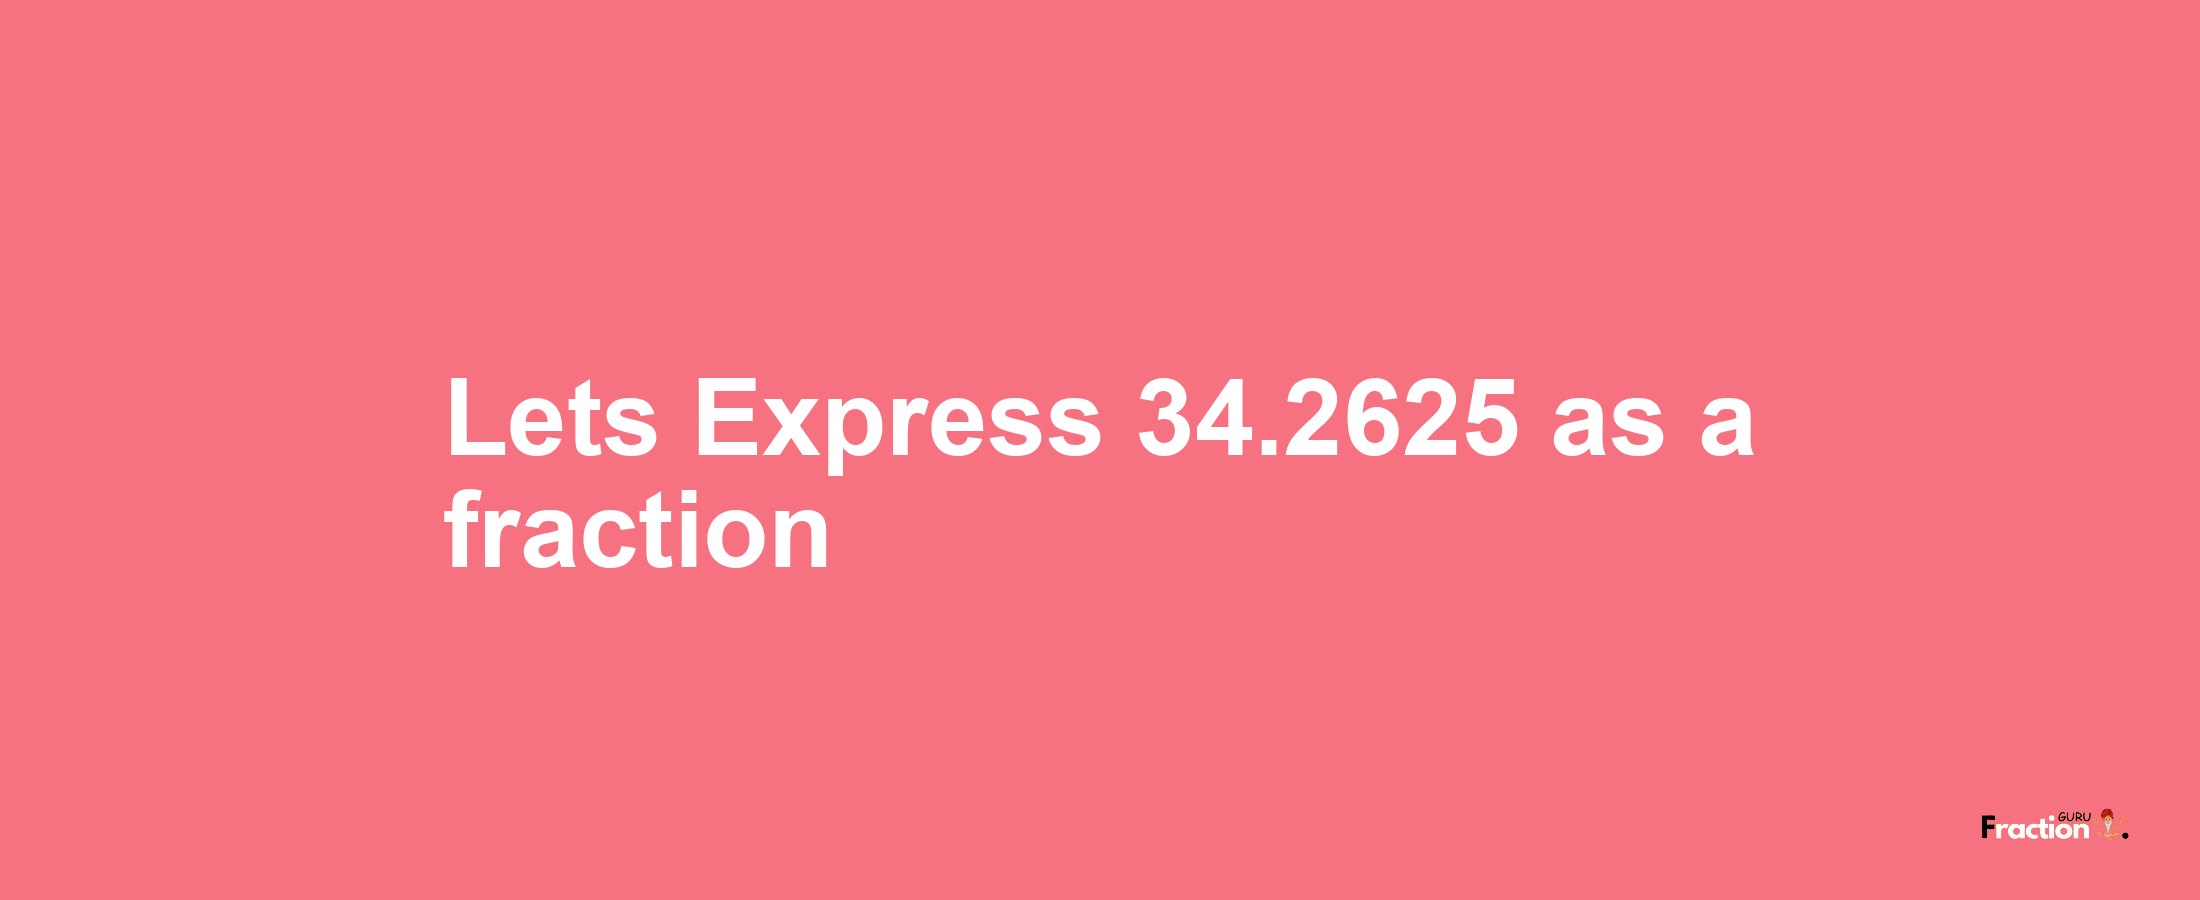 Lets Express 34.2625 as afraction